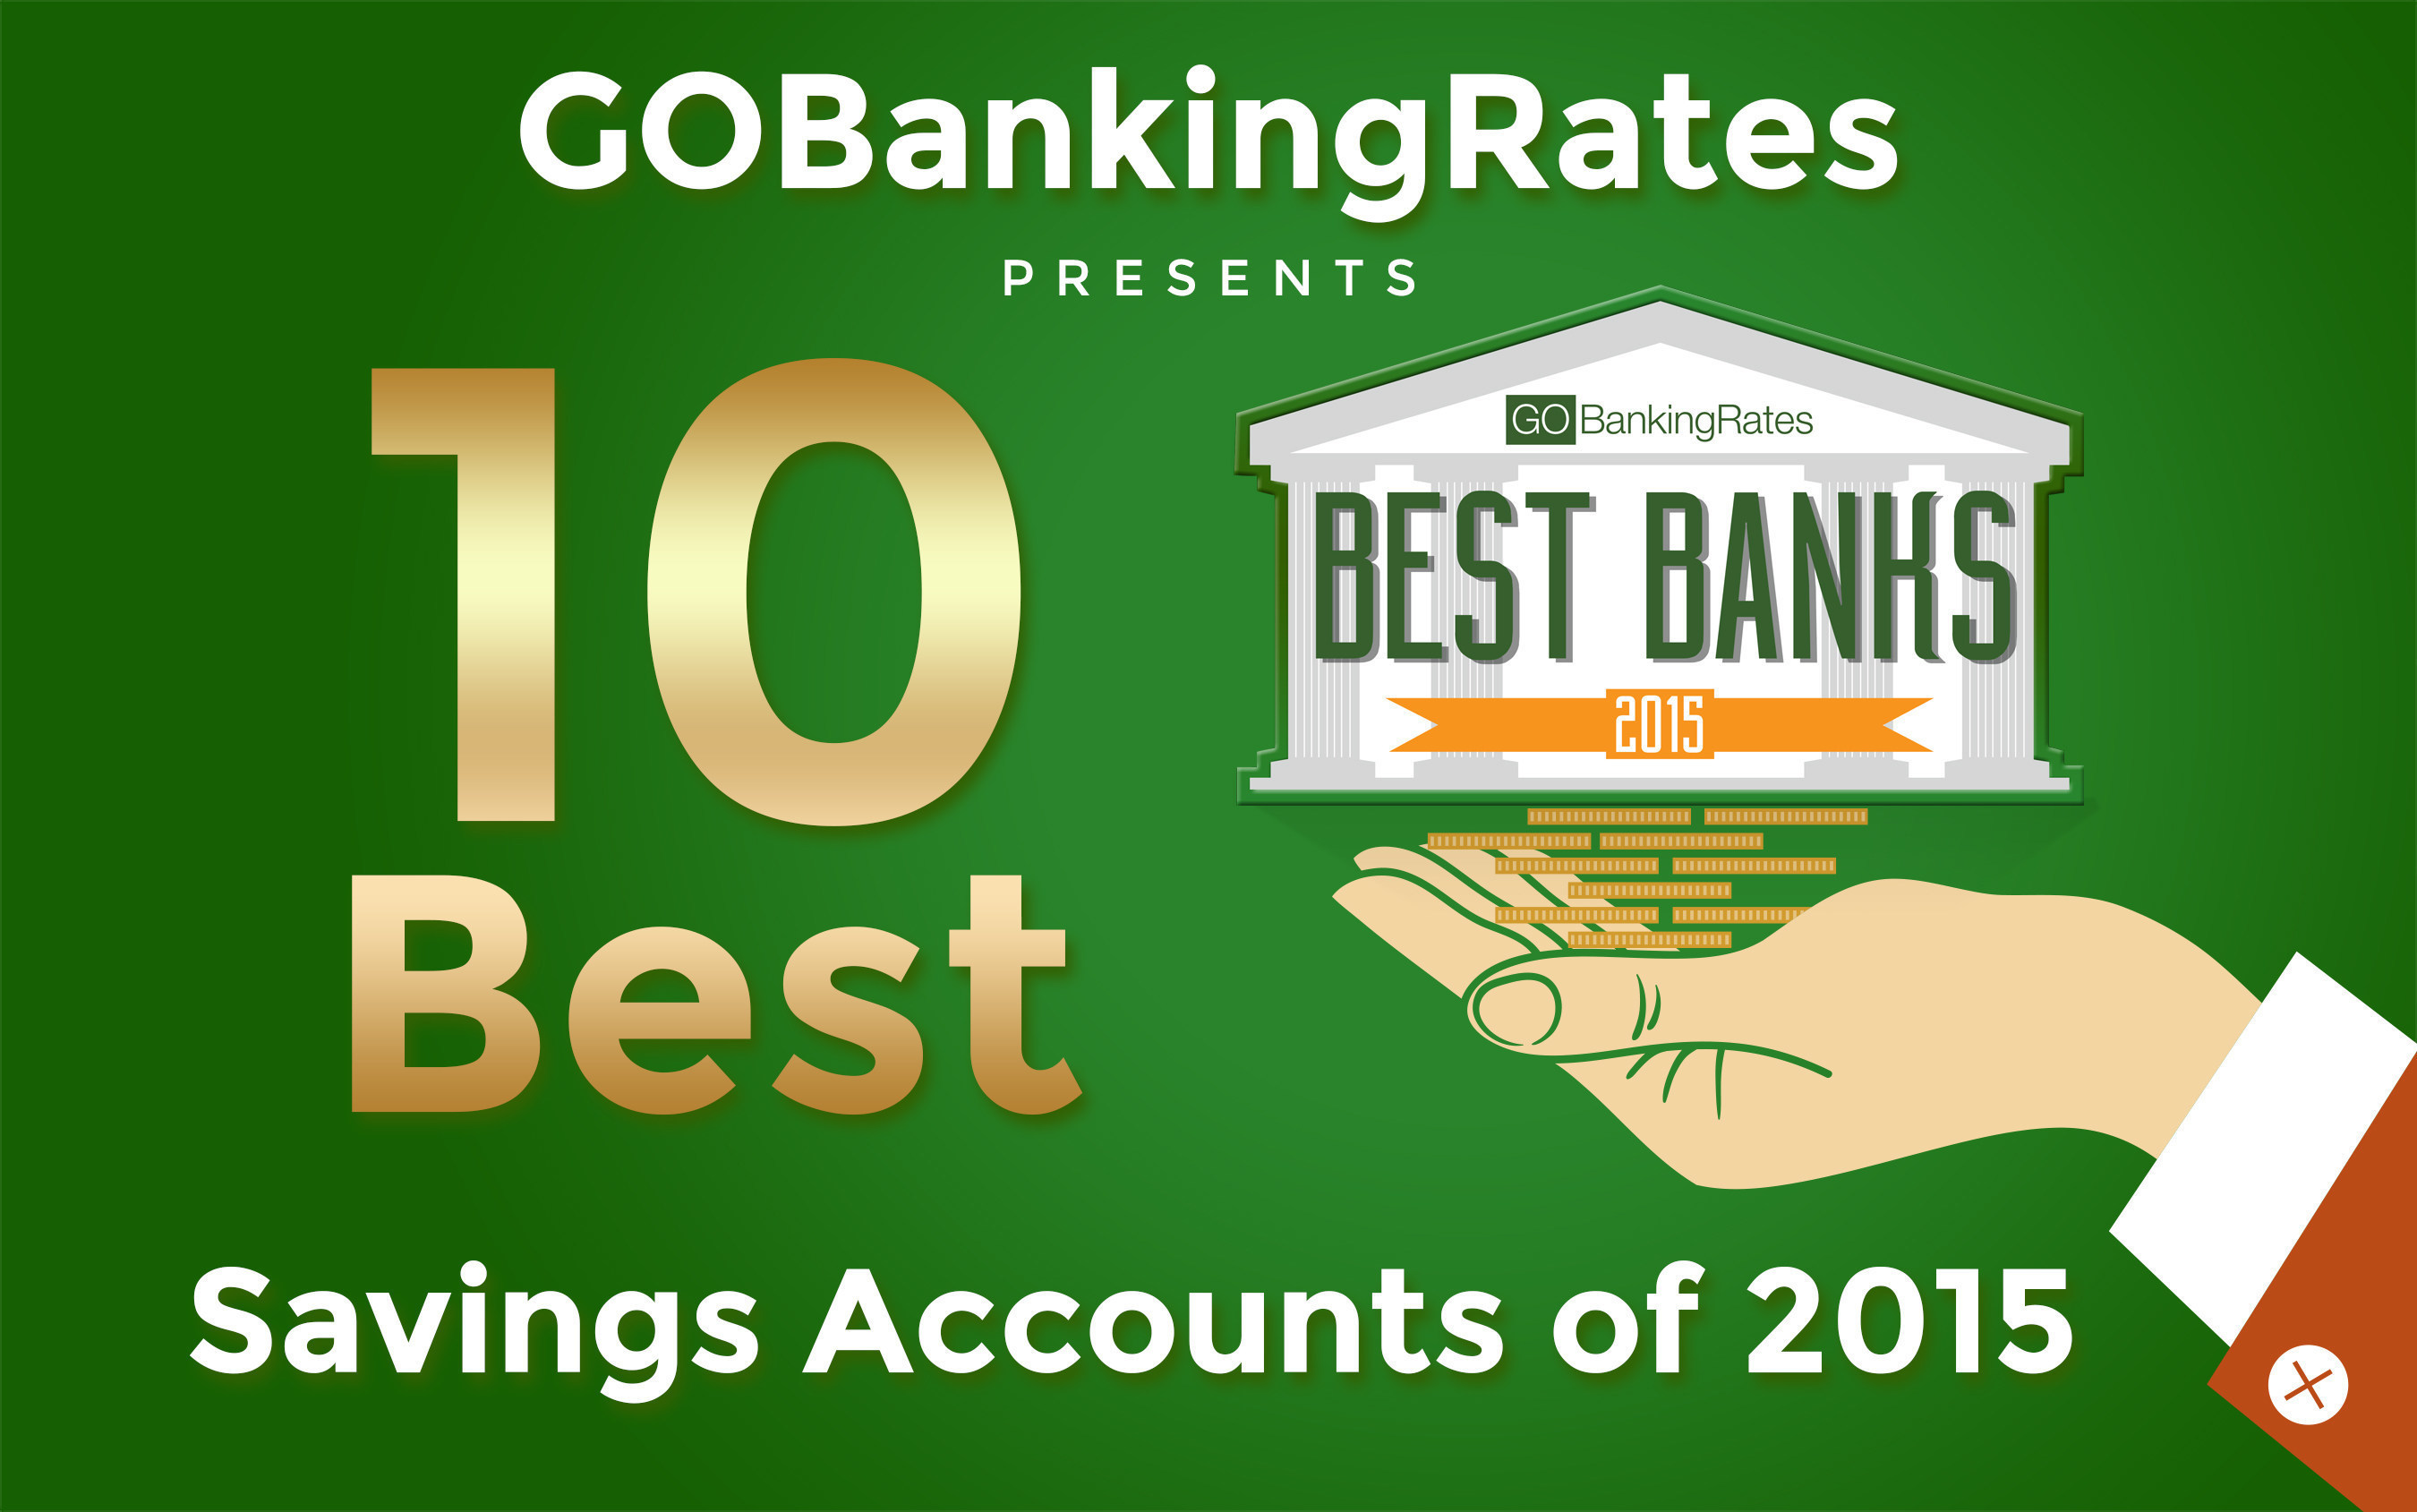 GOBankingRates' Study Reveals Top 10 Savings Accounts for 2015